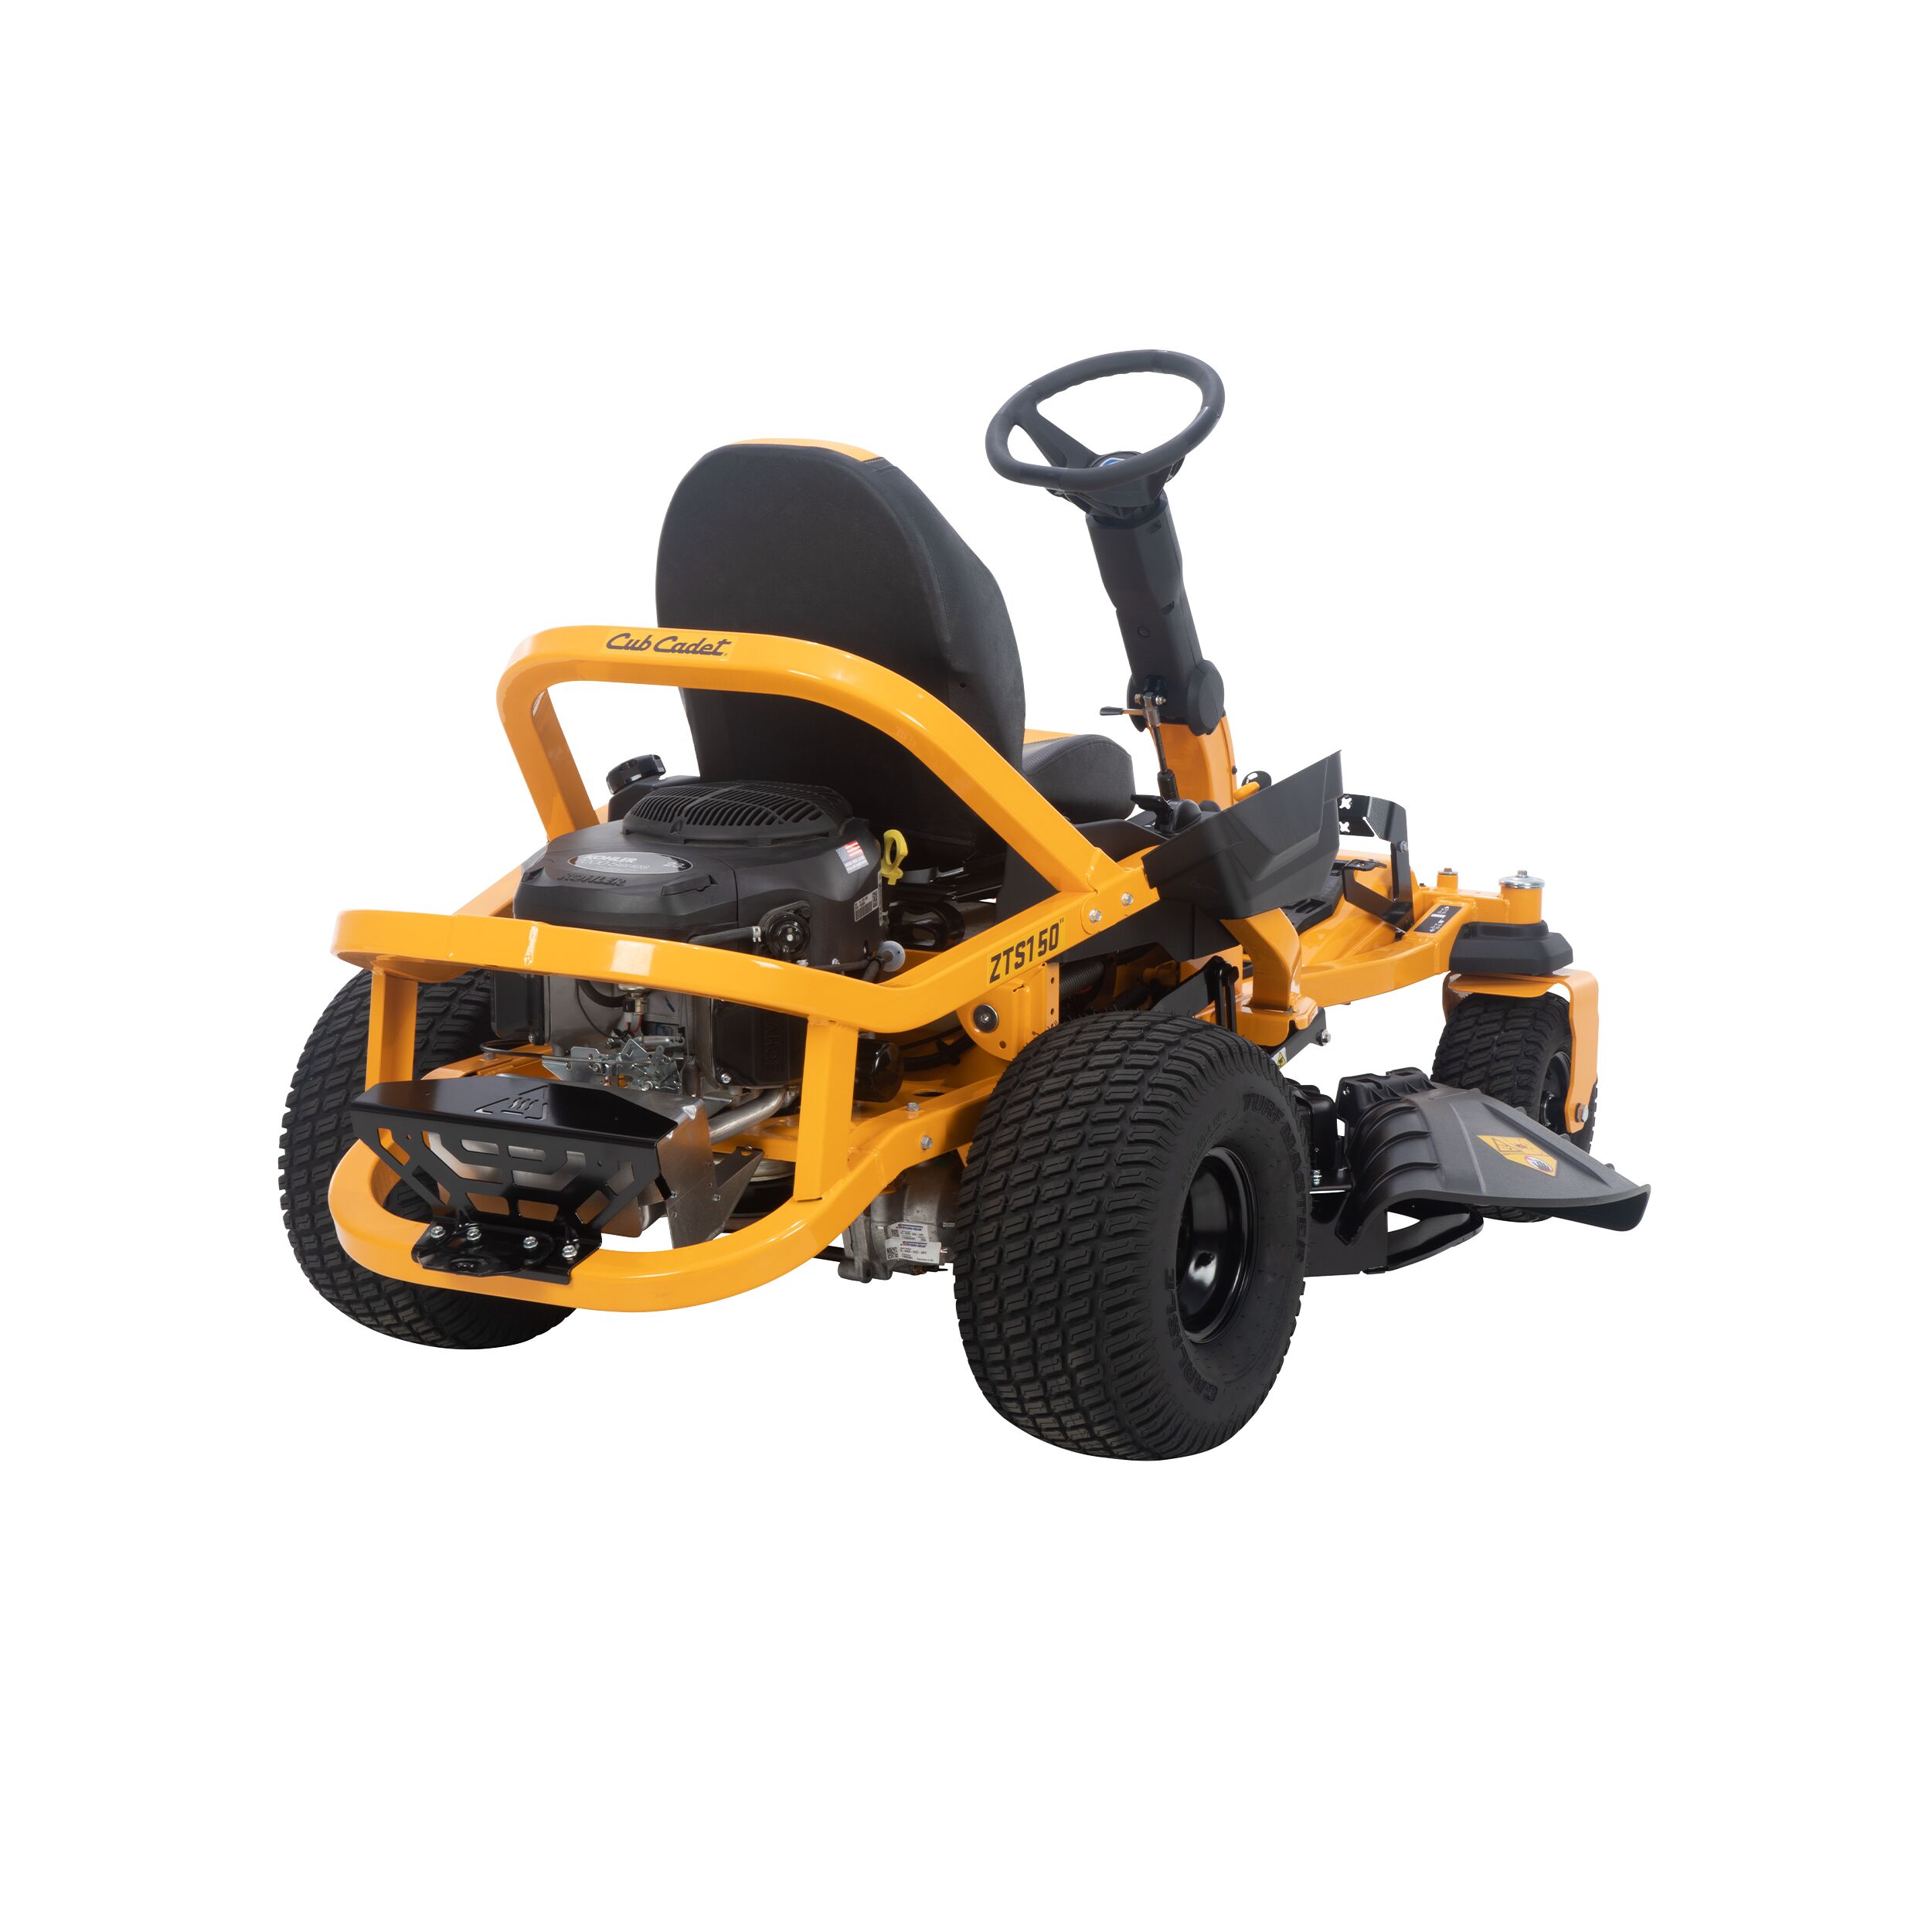 ZTS1 50 Zero-Turn Riding Lawn Mower 23HP with 50" Deck